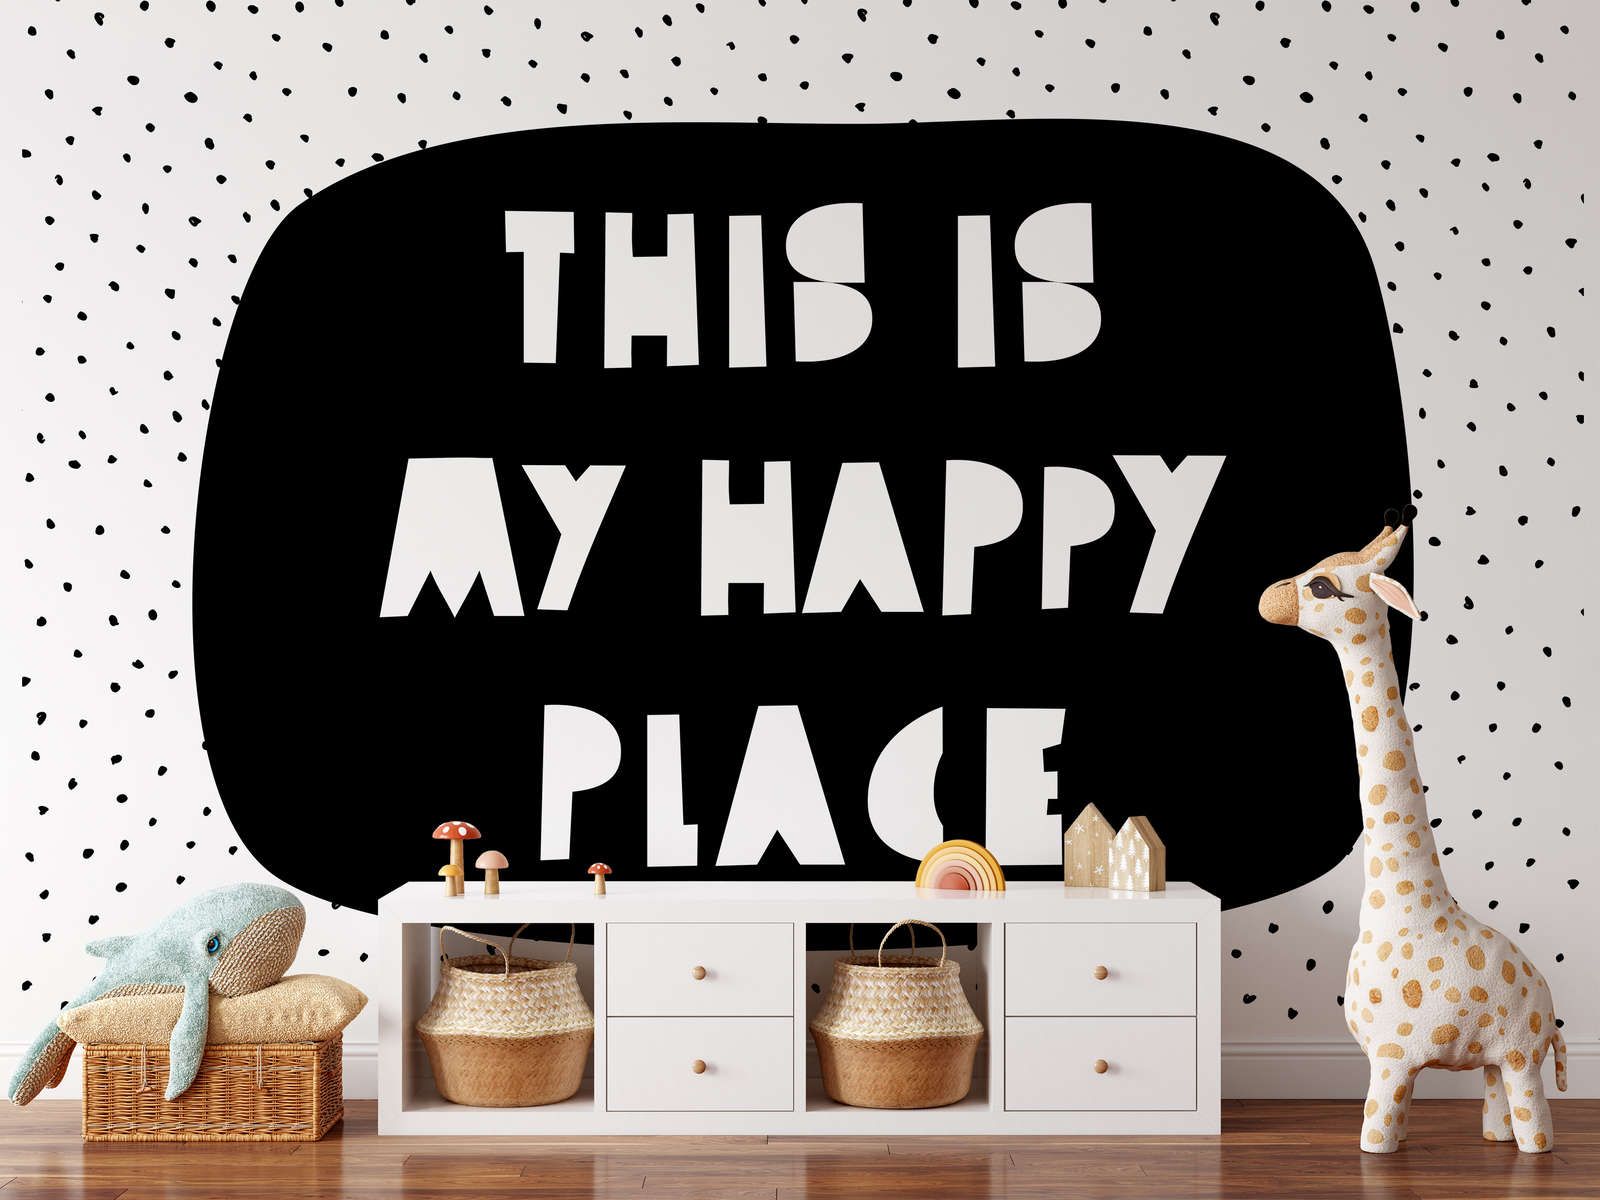             Nursery mural with "This is my happy place" lettering - Smooth & pearlescent non-woven
        